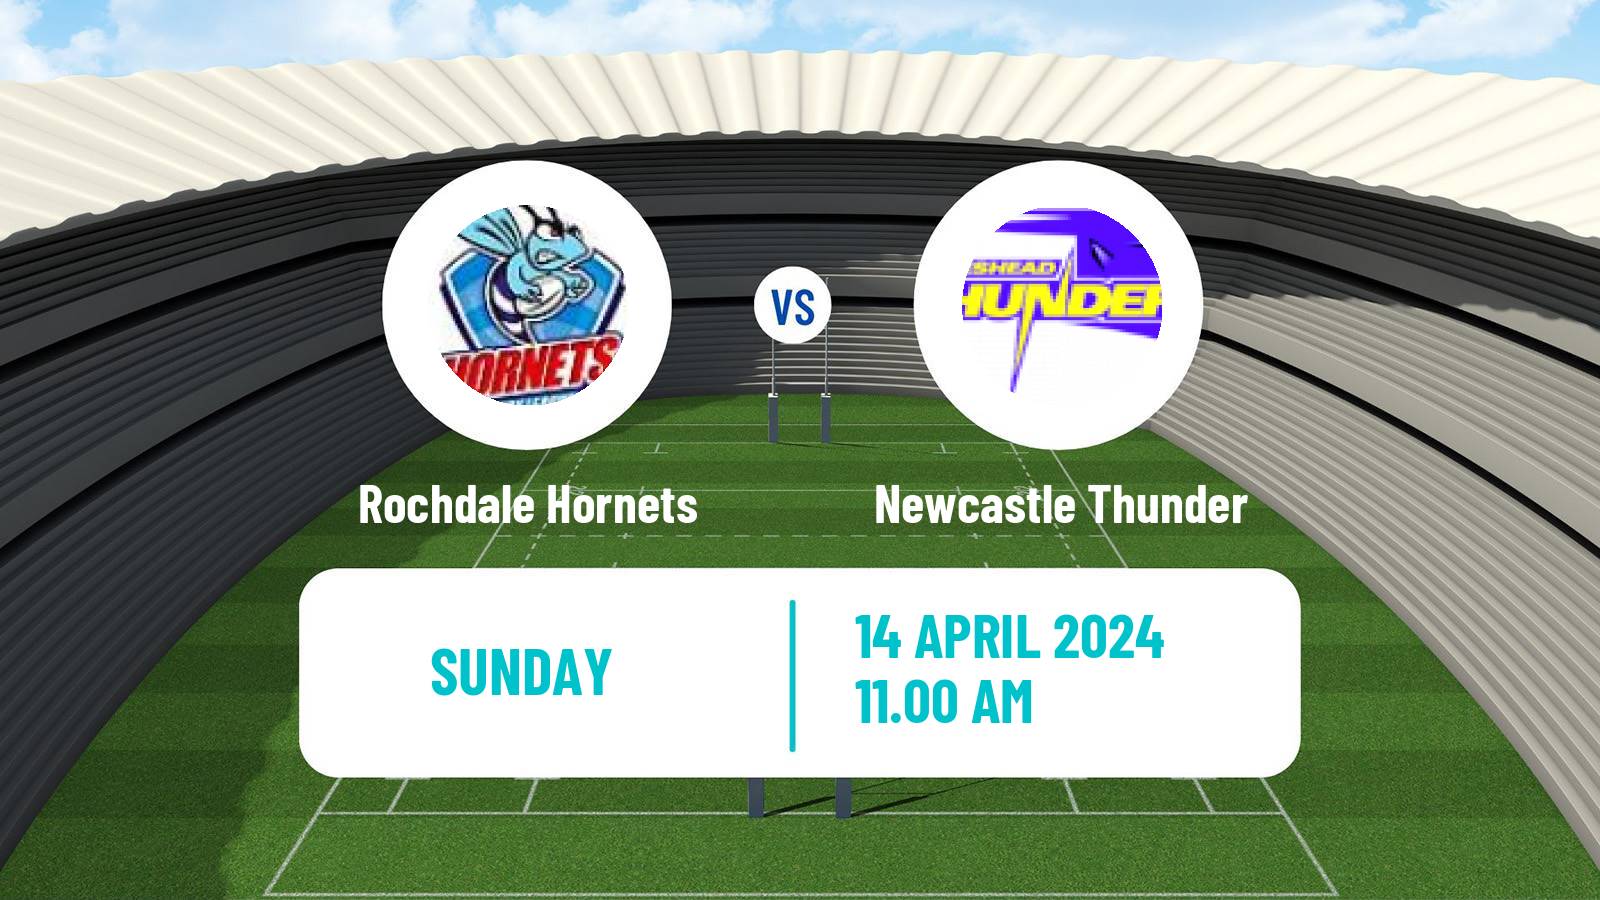 Rugby league English League 1 Rugby League Rochdale Hornets - Newcastle Thunder